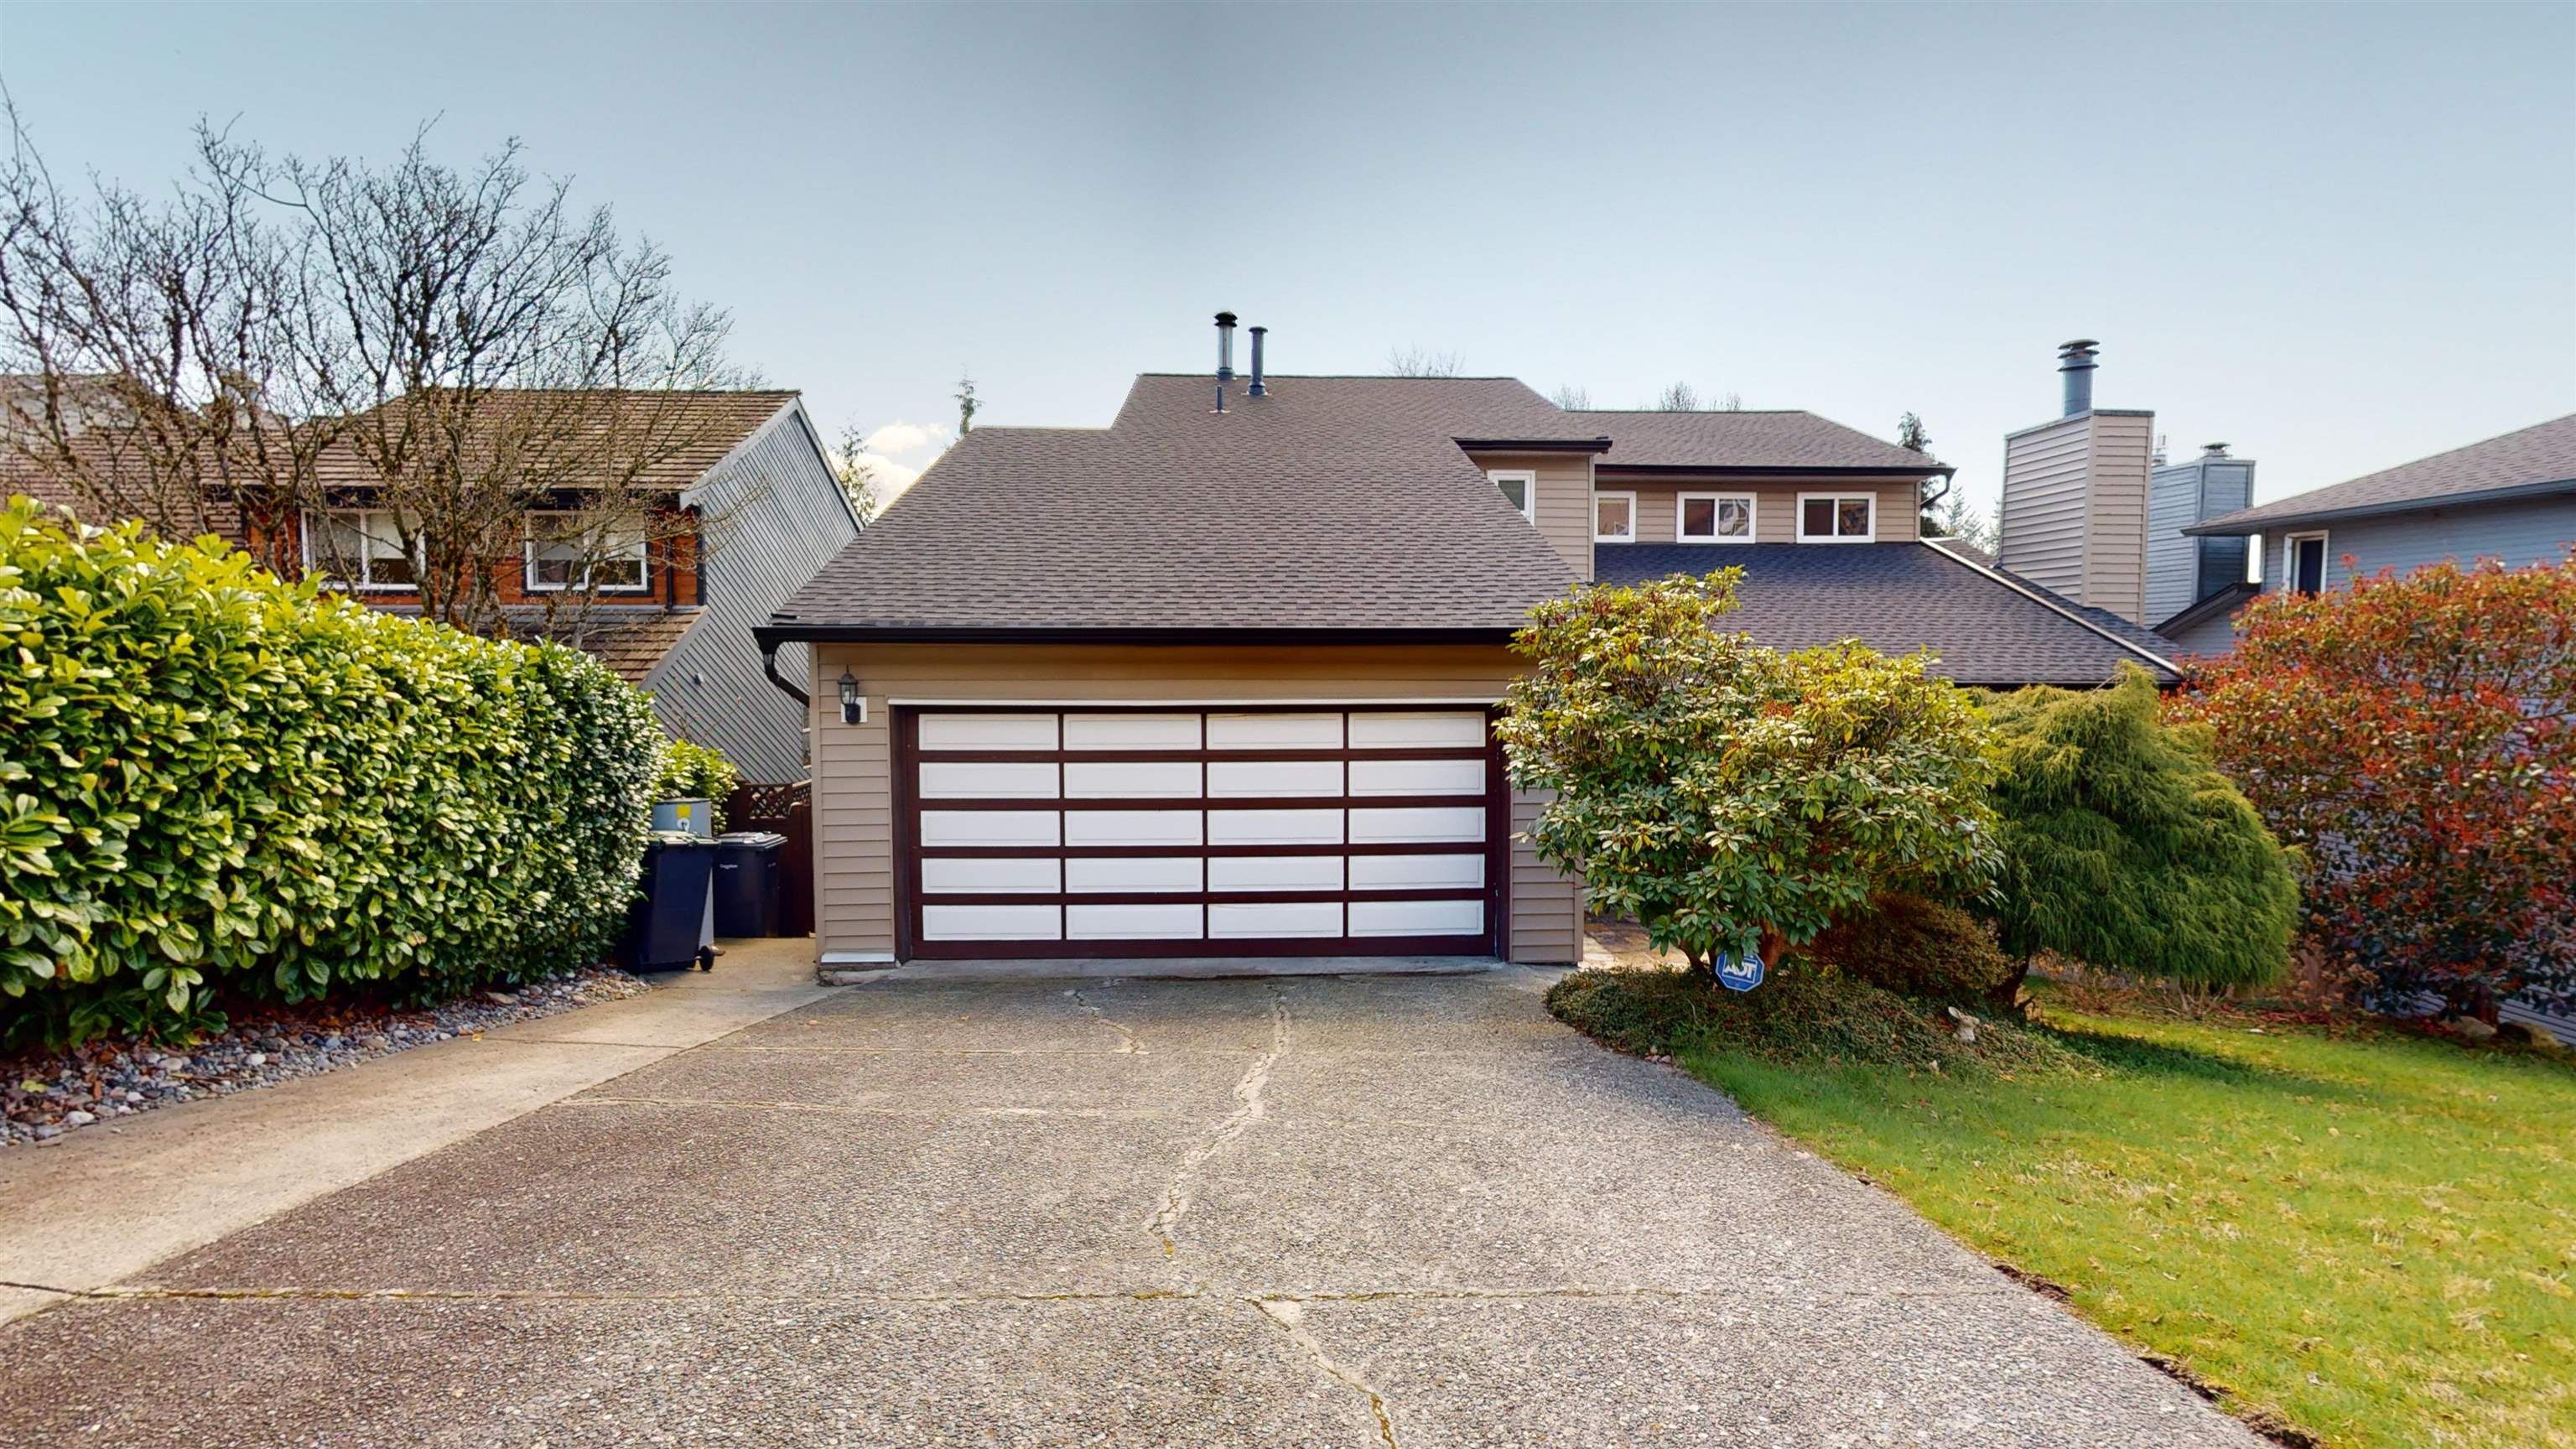 New property listed in Upper Eagle Ridge, Coquitlam